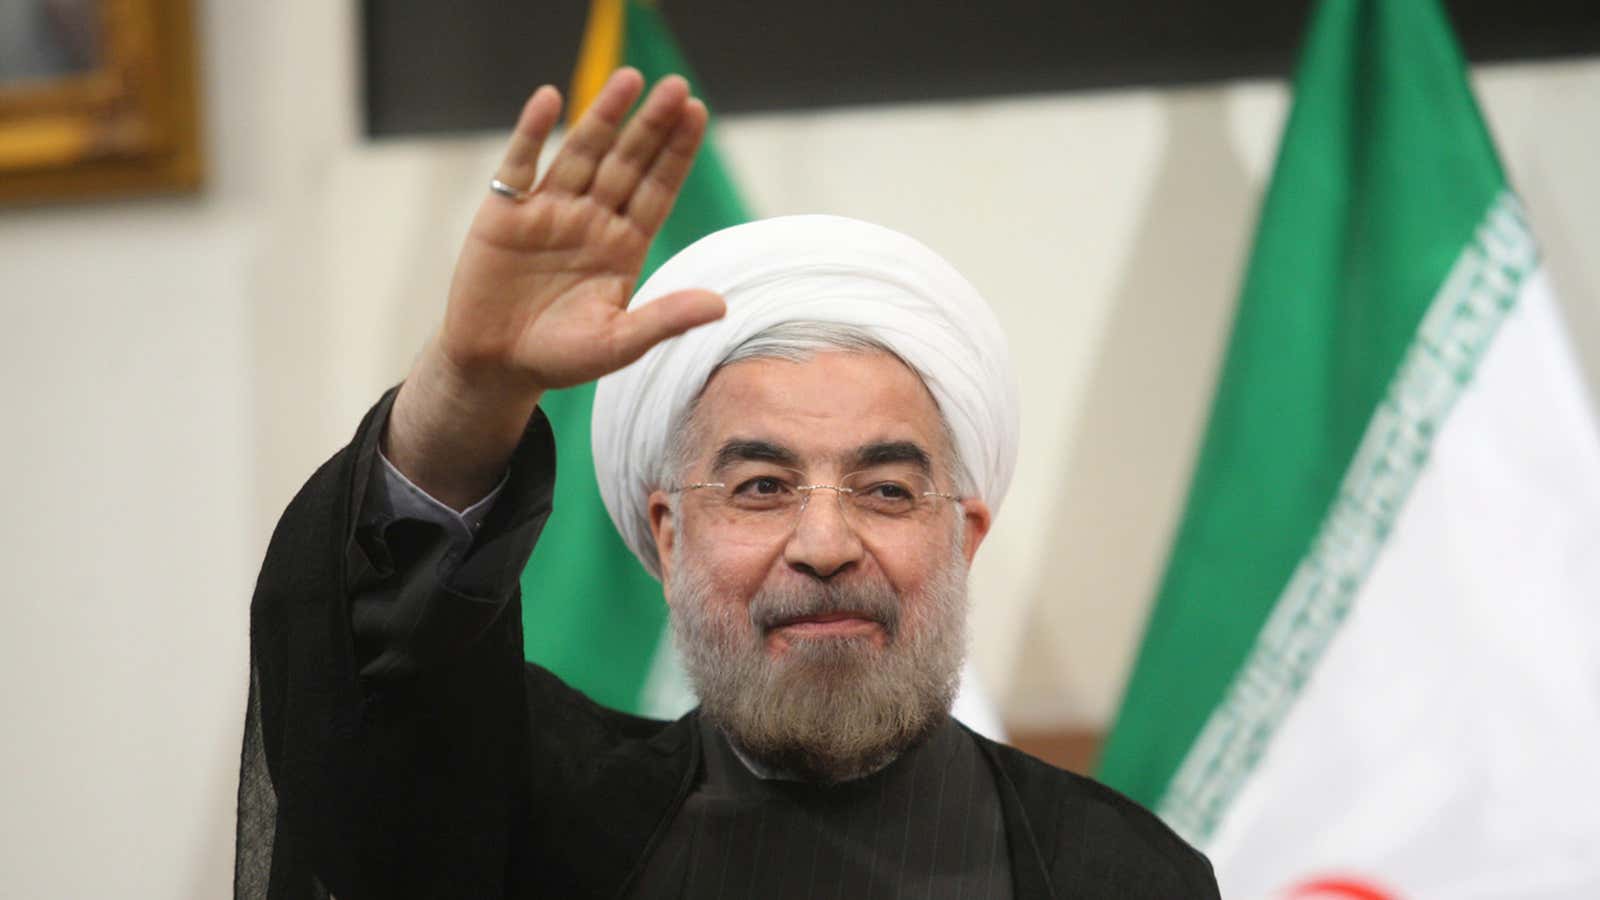 Iranian president Hassan Rohani hoped the Iran Nuclear deal would bolster Iran’s economy and encourage foreign investment.